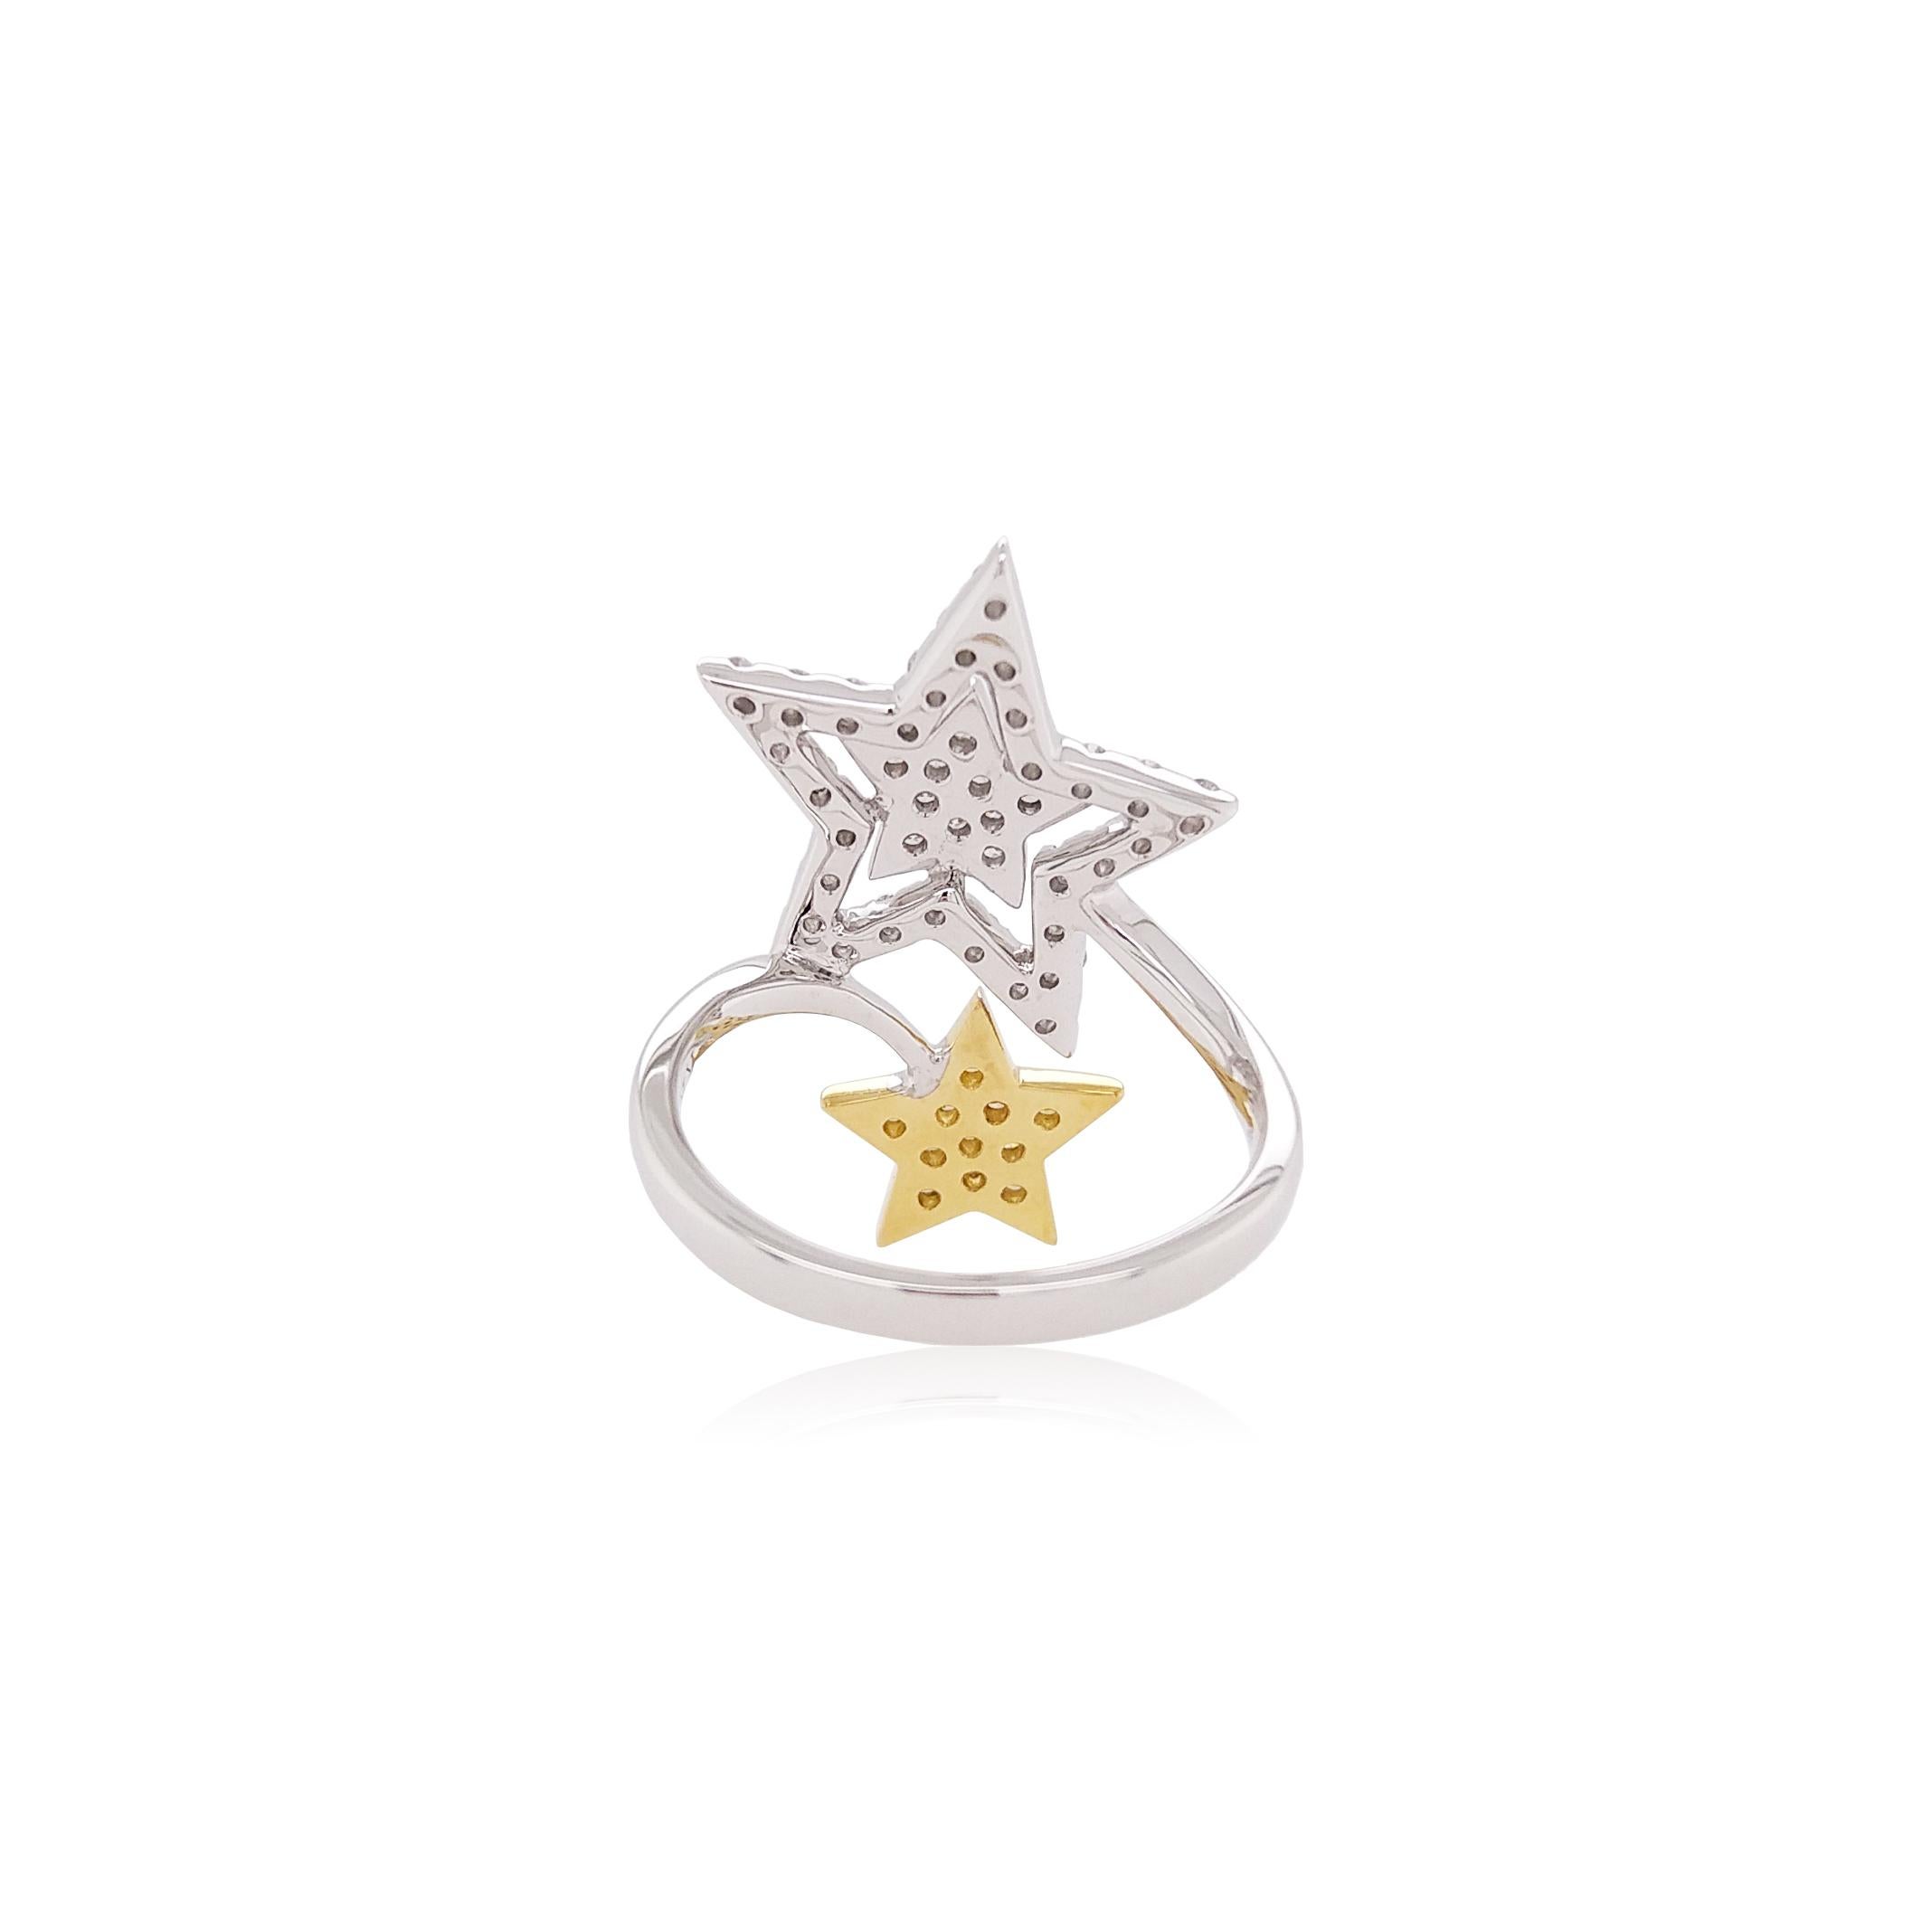 This hypnotic ring features two mesmeric star-shaped Yellow and White diamonds, set amongst a delicate scattering of diamonds. Each diamond is completely unique, and this design perfectly highlights the allure and mystique of diamonds. This